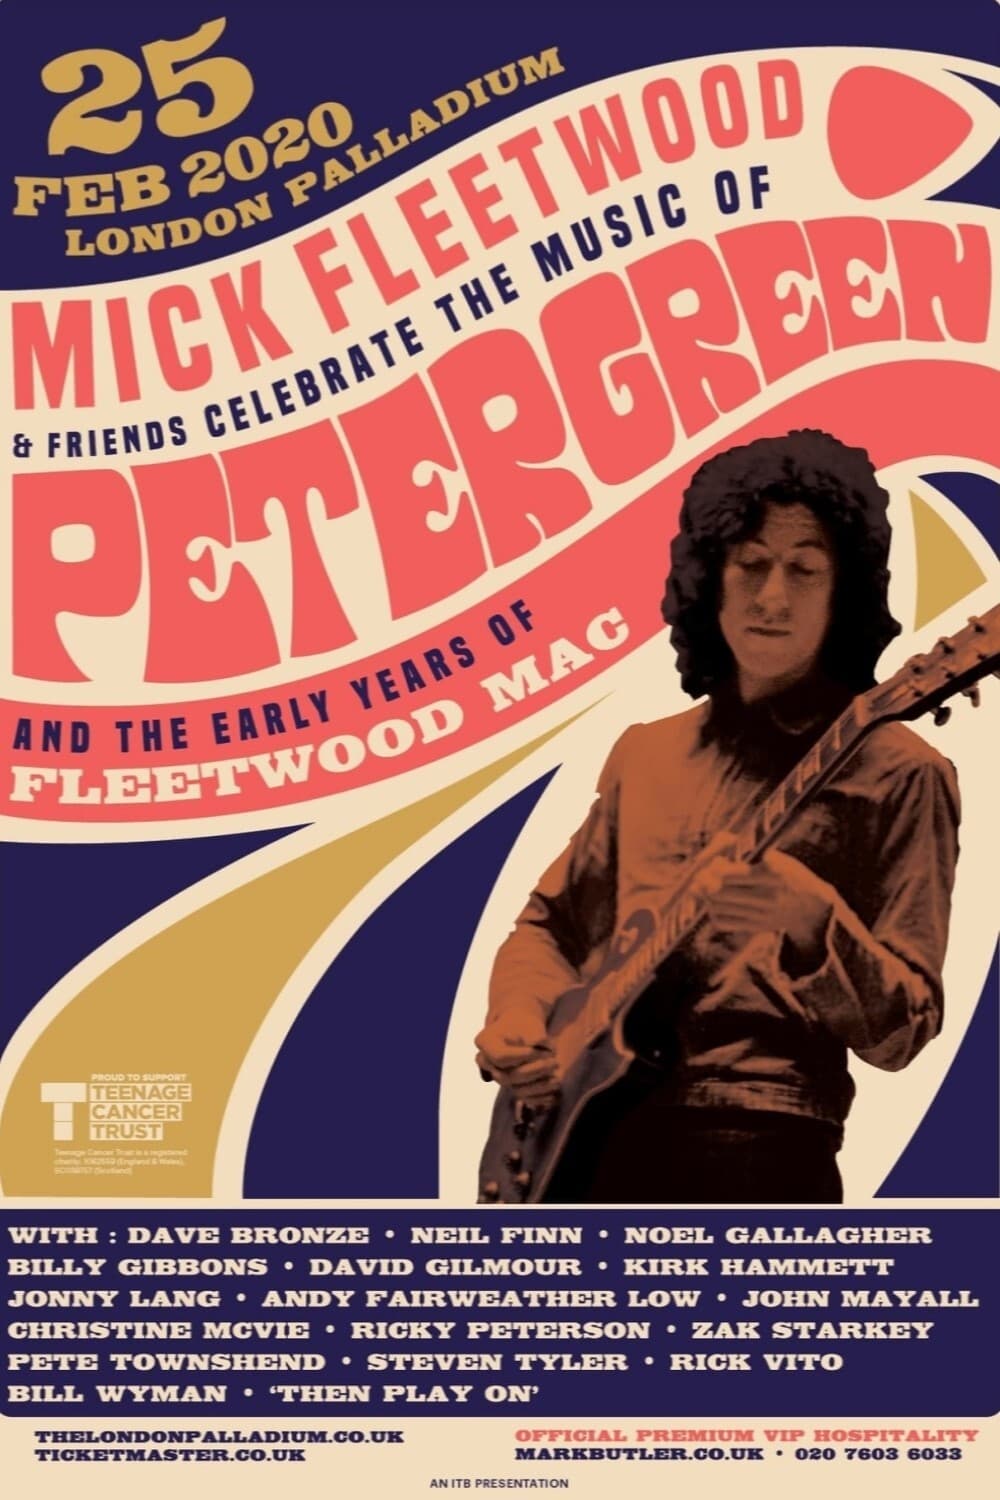 Mick Fleetwood and Friends: Celebrate the Music of Peter Green and the Early Years of Fleetwood Mac